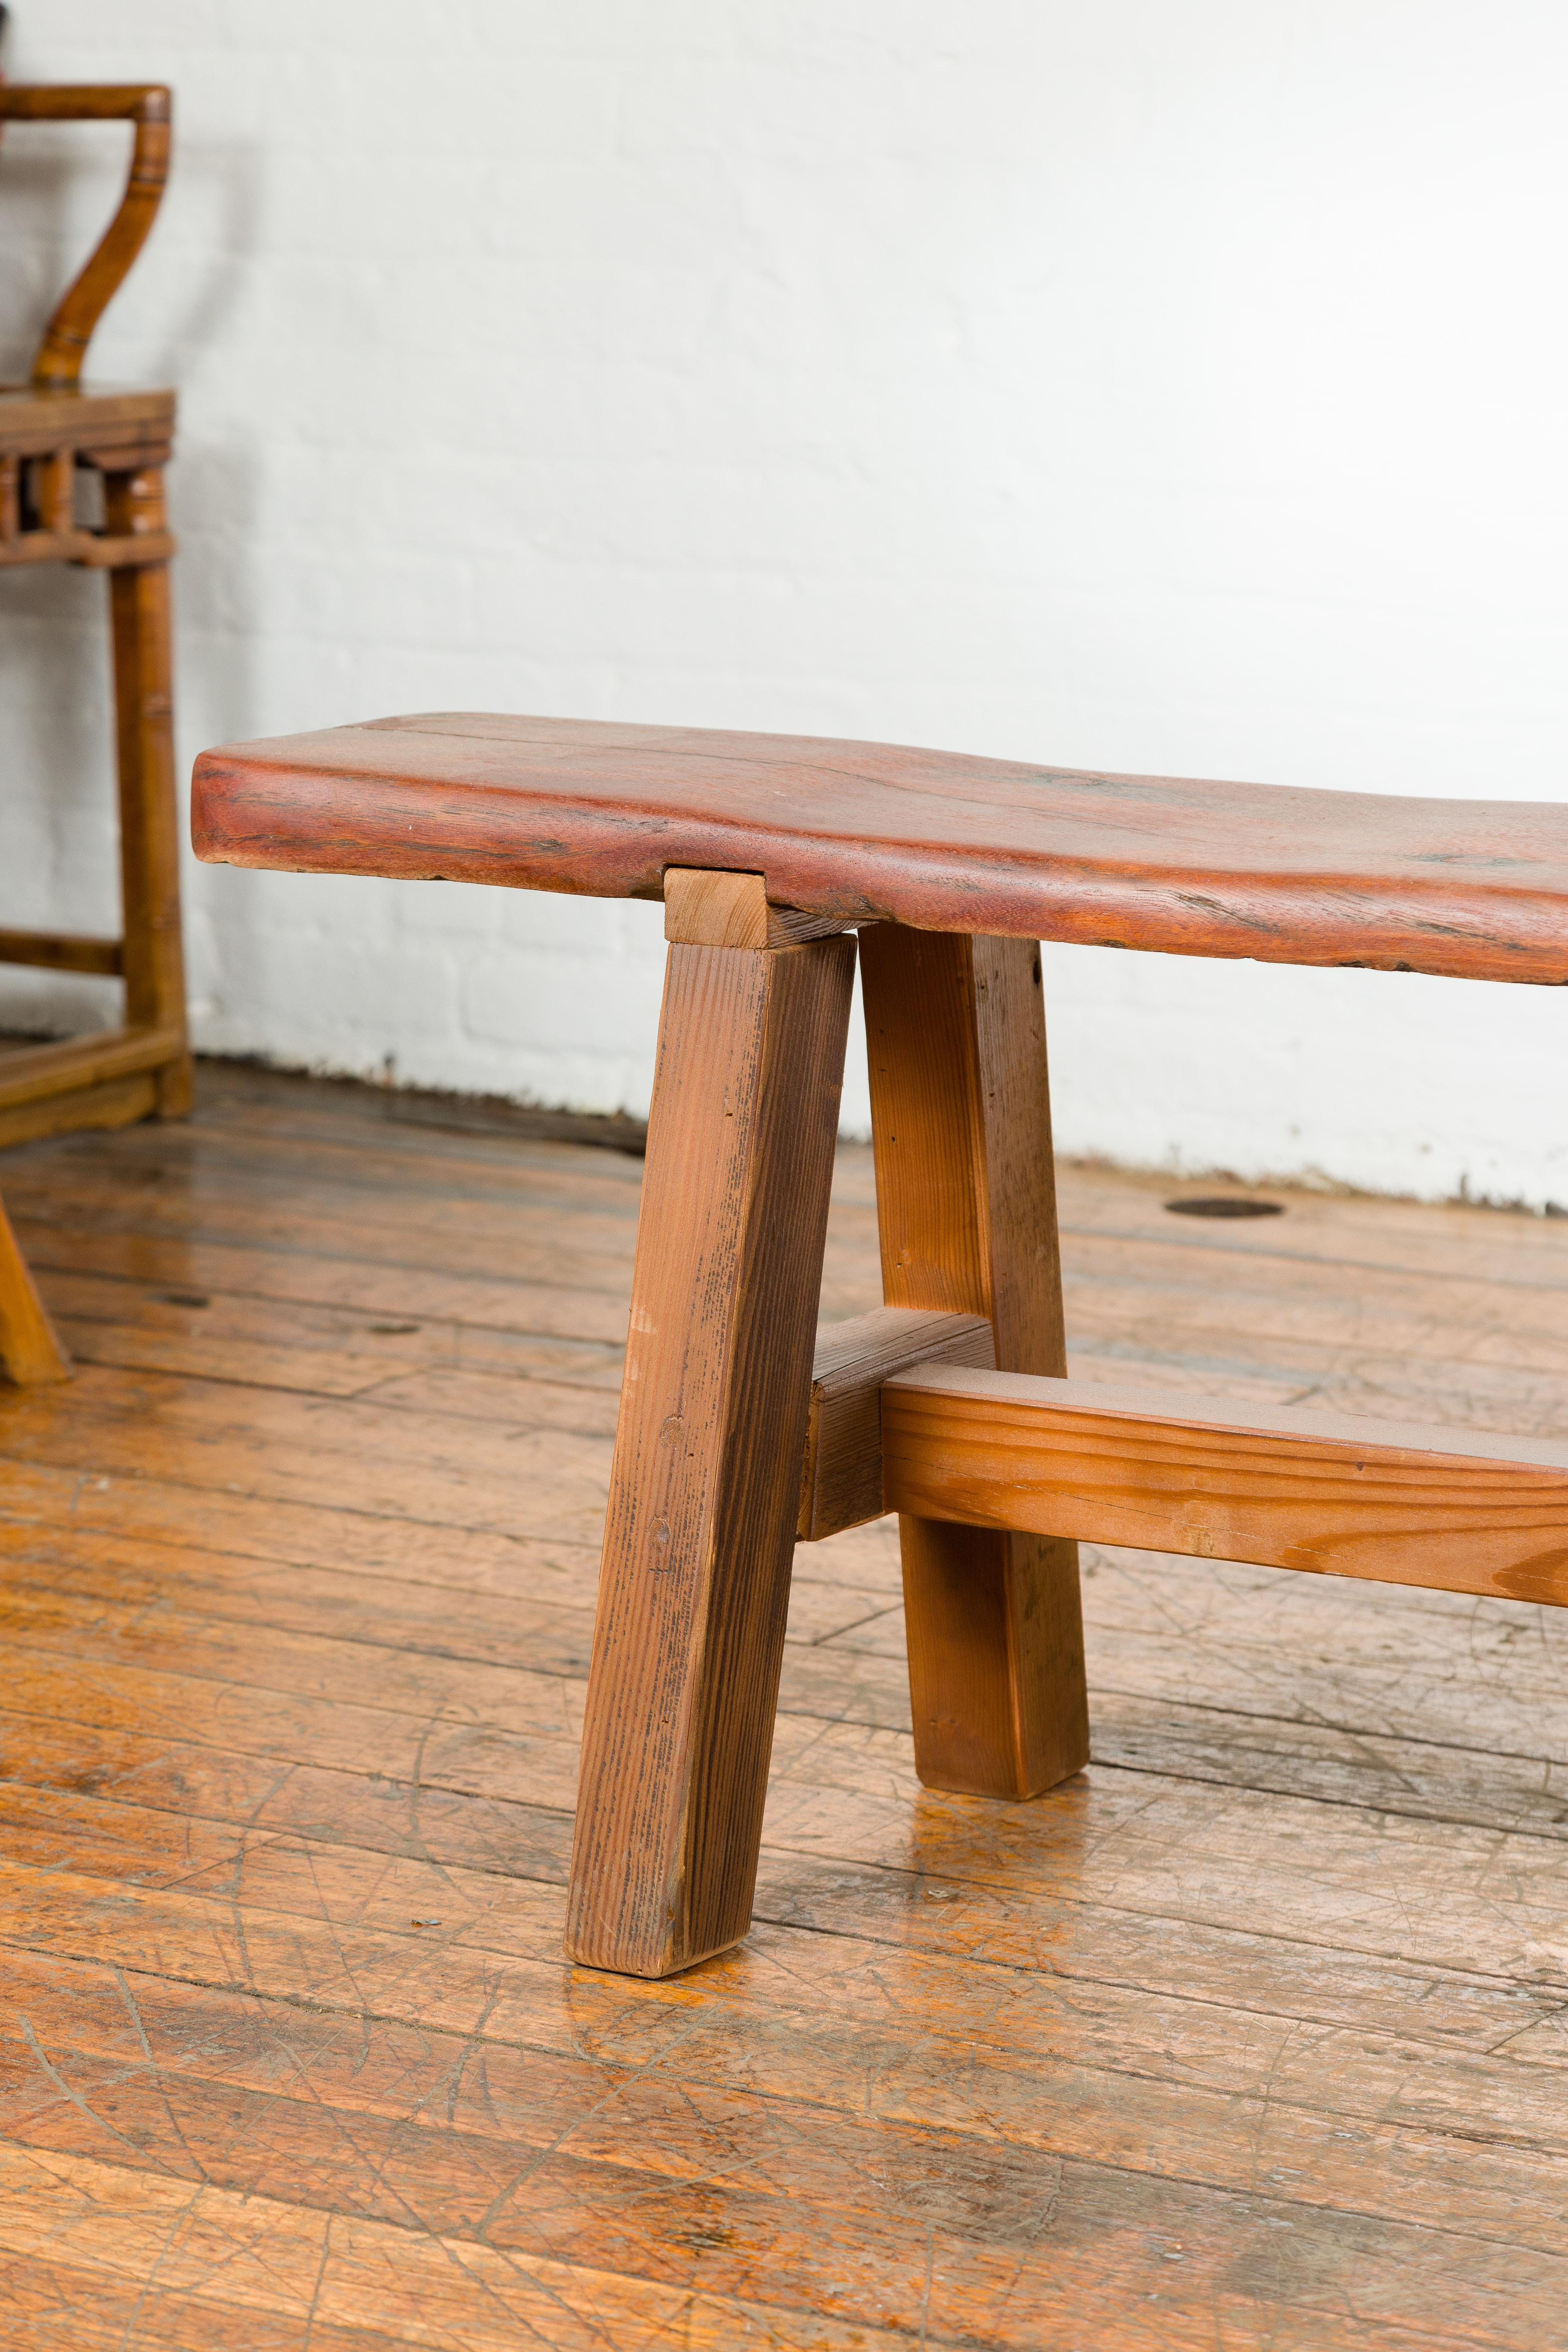 20th Century Rustic Long A-Frame Wooden Bench with Cross Stretcher and Splaying Legs For Sale